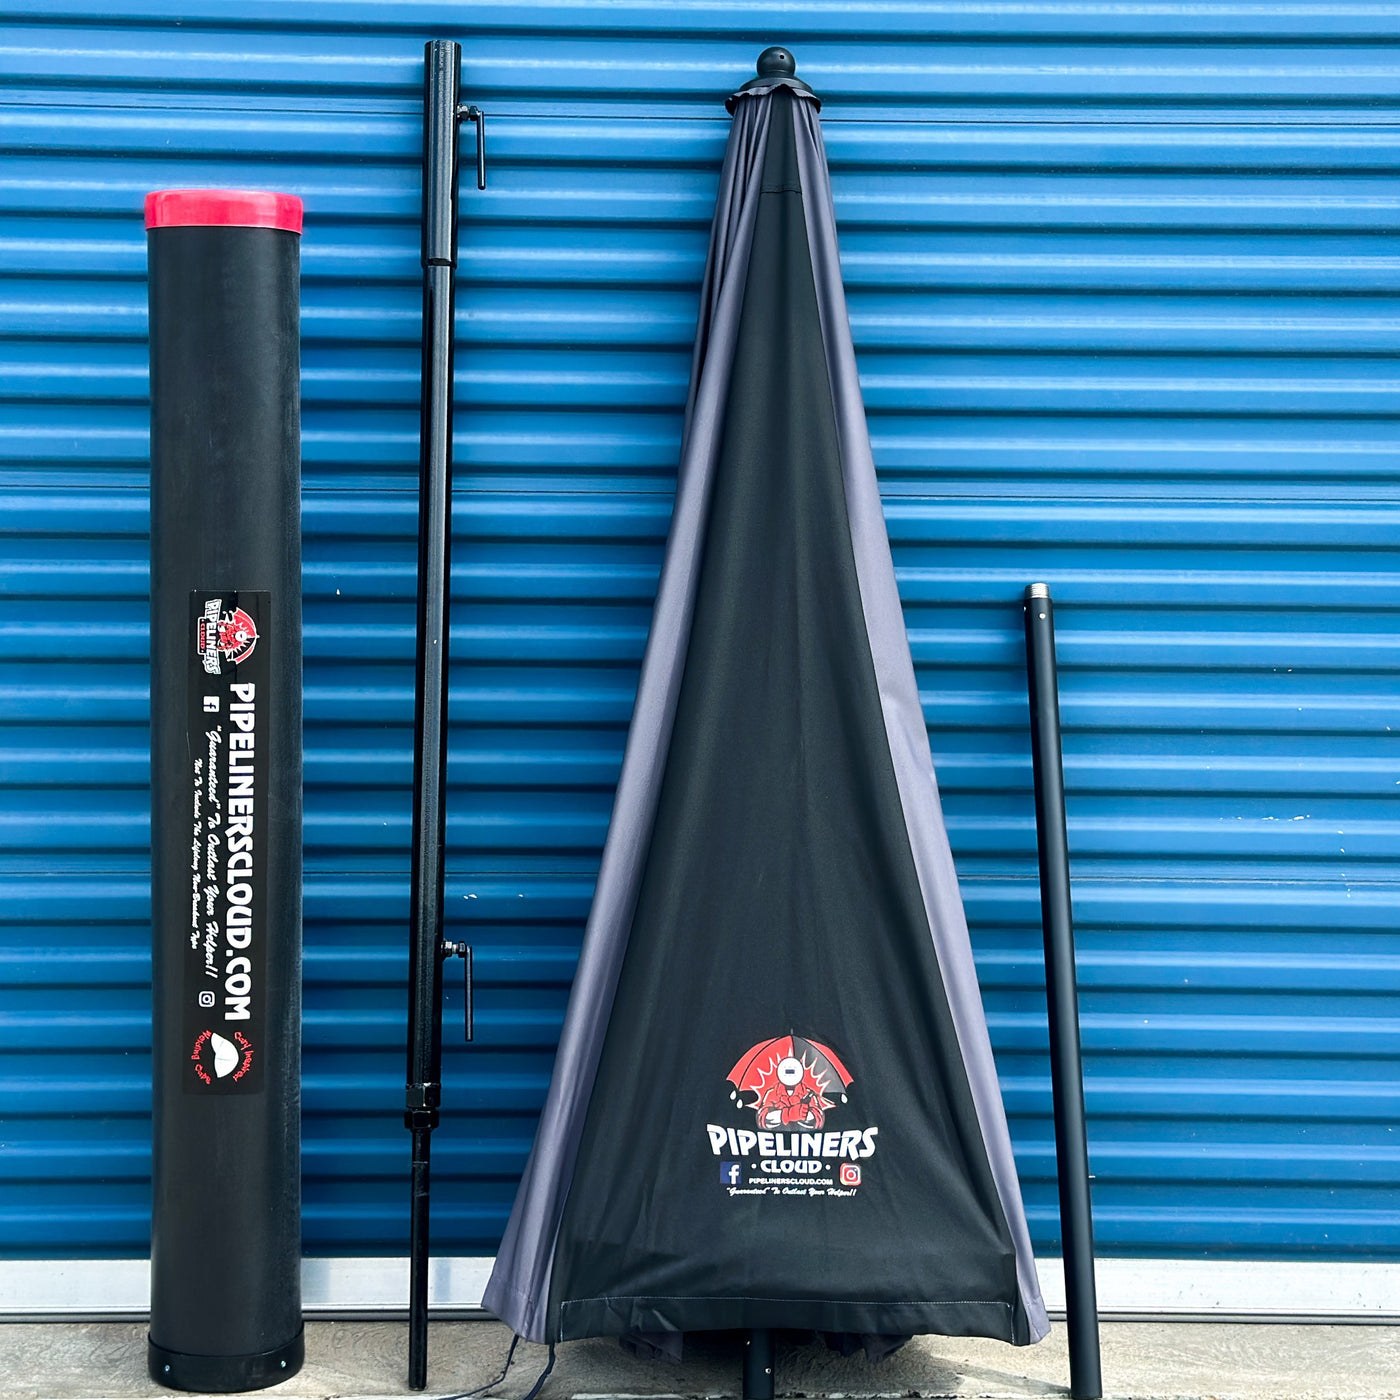 PipelinersCloud 10' Umbrella Complete Shade System